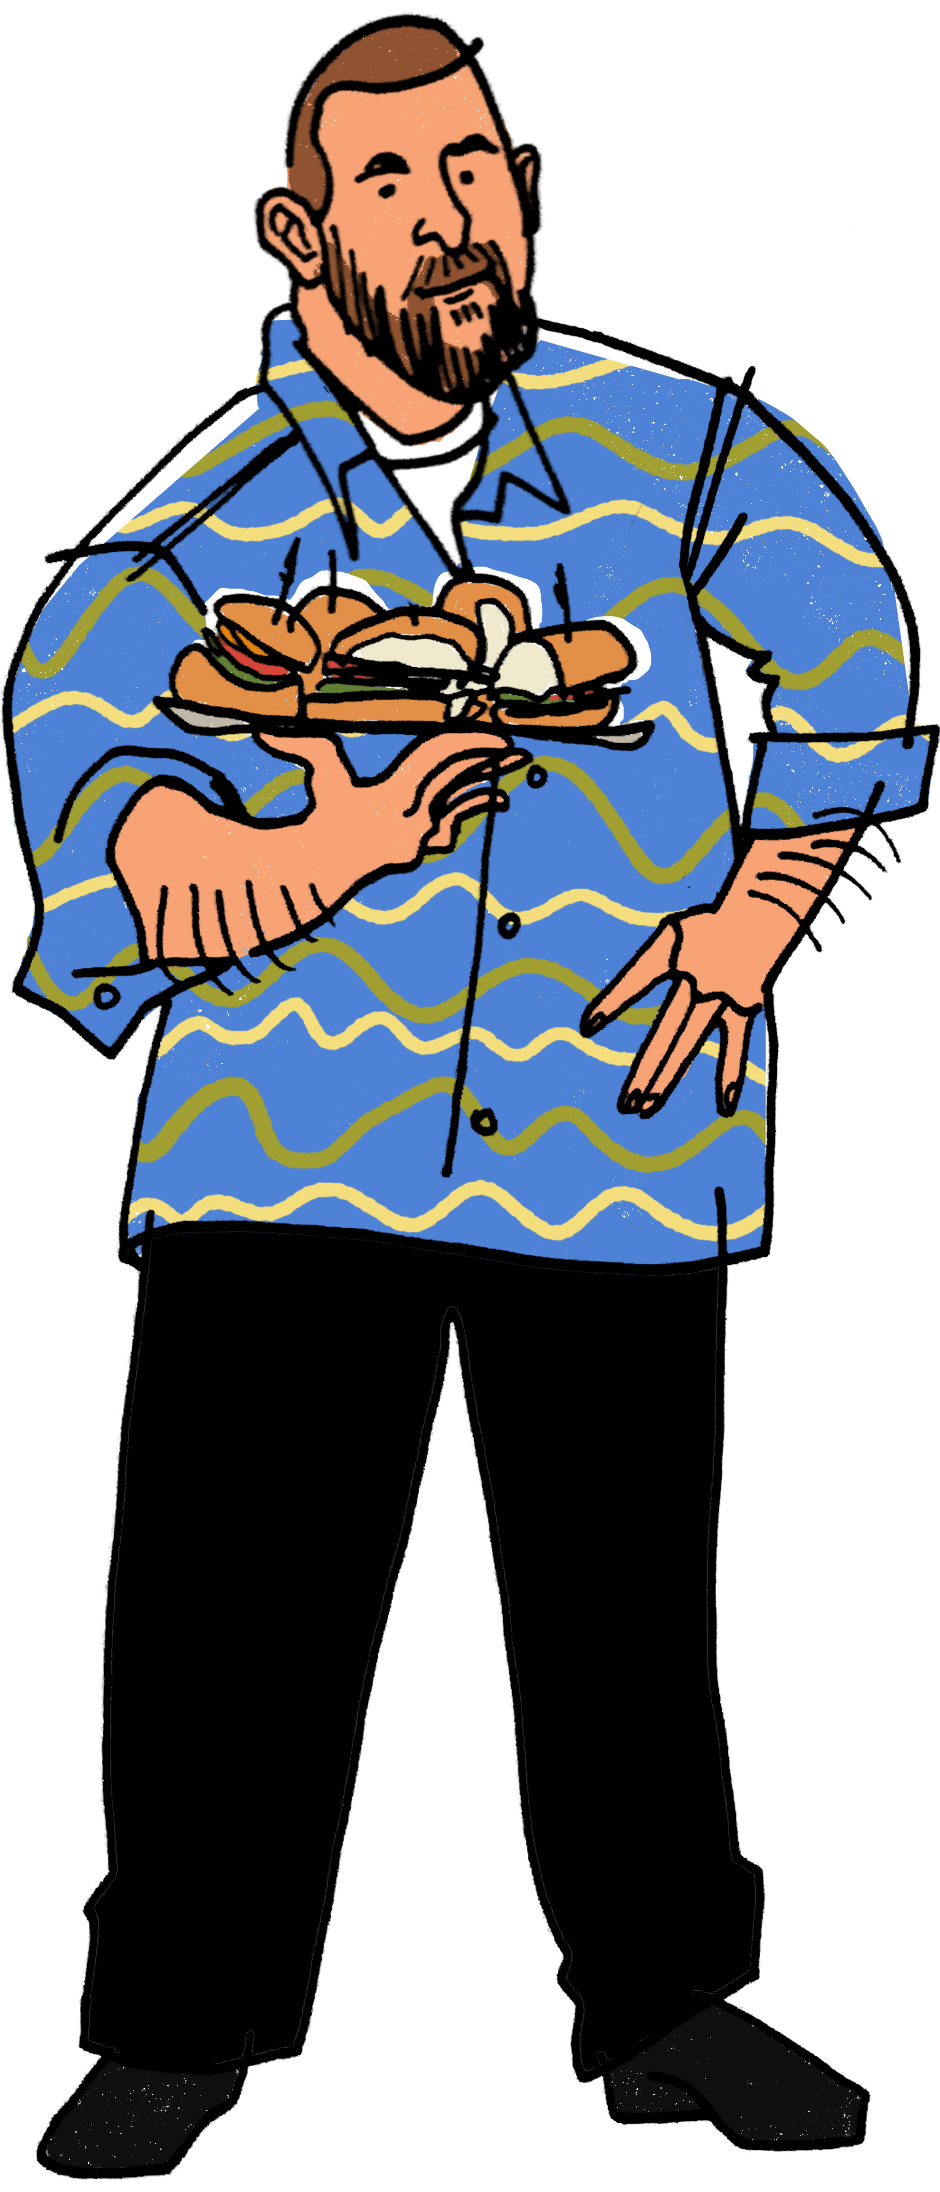 Illustration by Nono Flores of craft service, a man wearing a striped blue shirt and holding a platter of subs